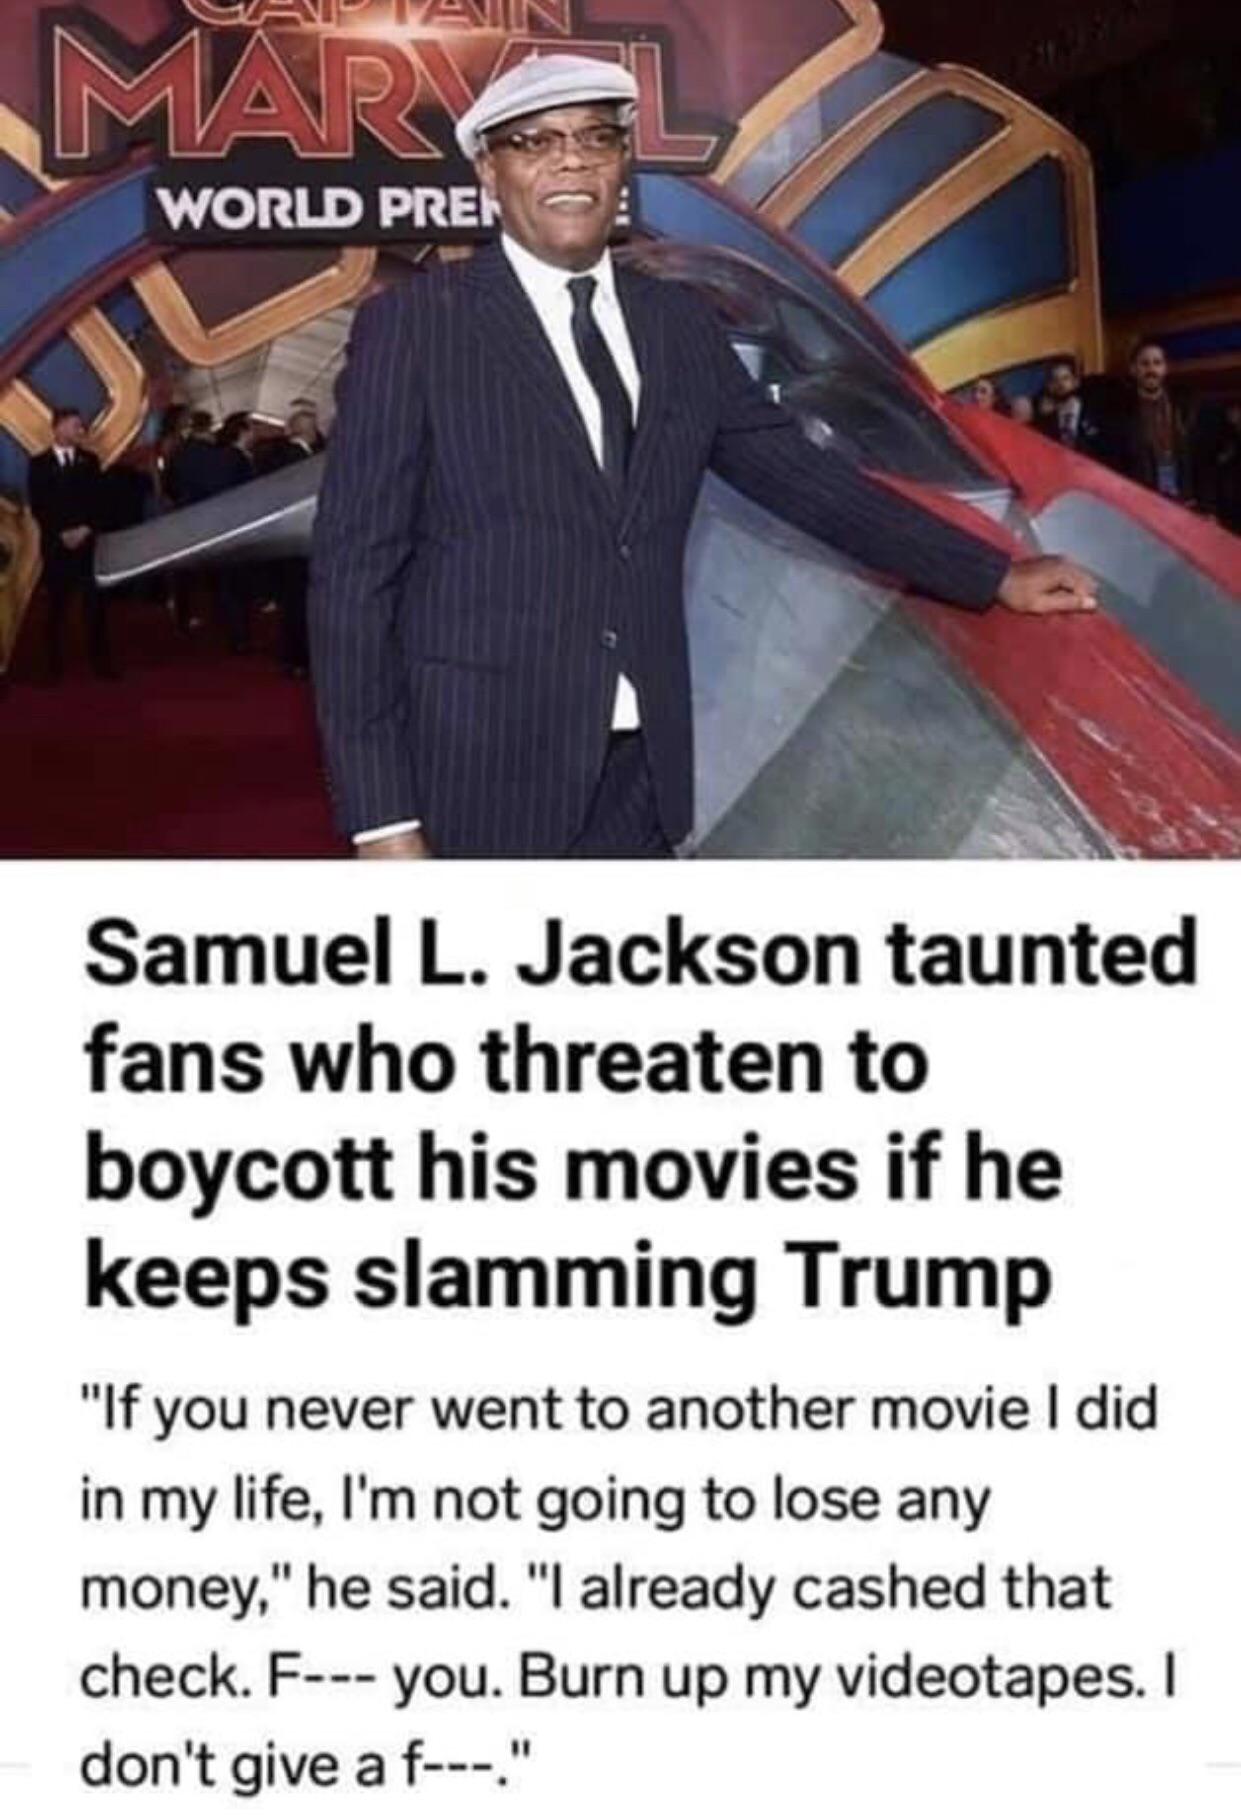 Samuel L. Jackson is not too worried about snowflakes.